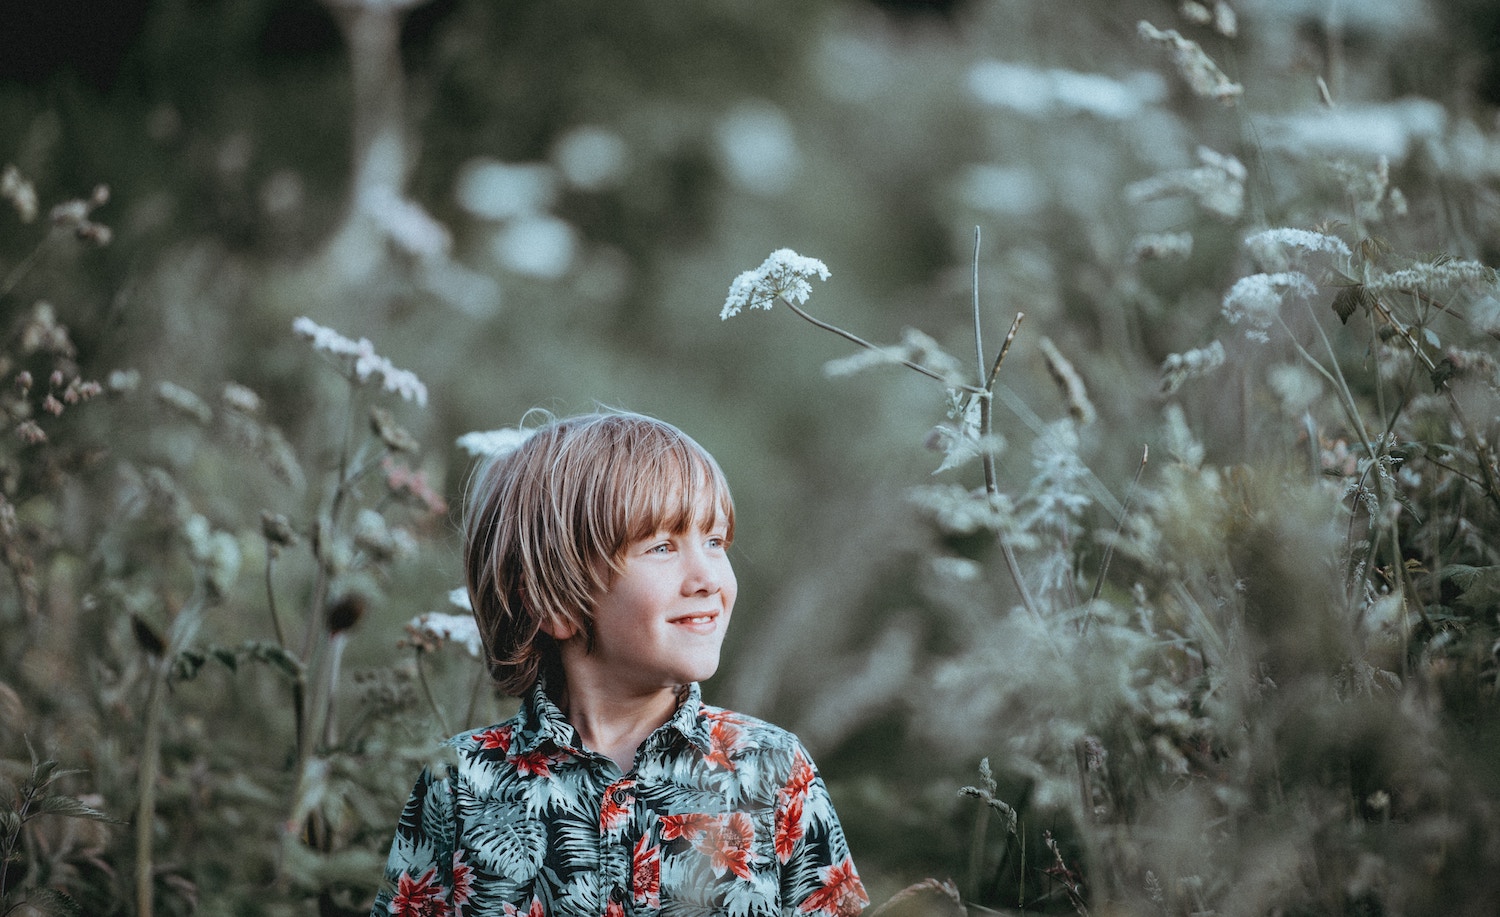 A highly sensitive child (male) in a field looking thoughtfully into the distance.